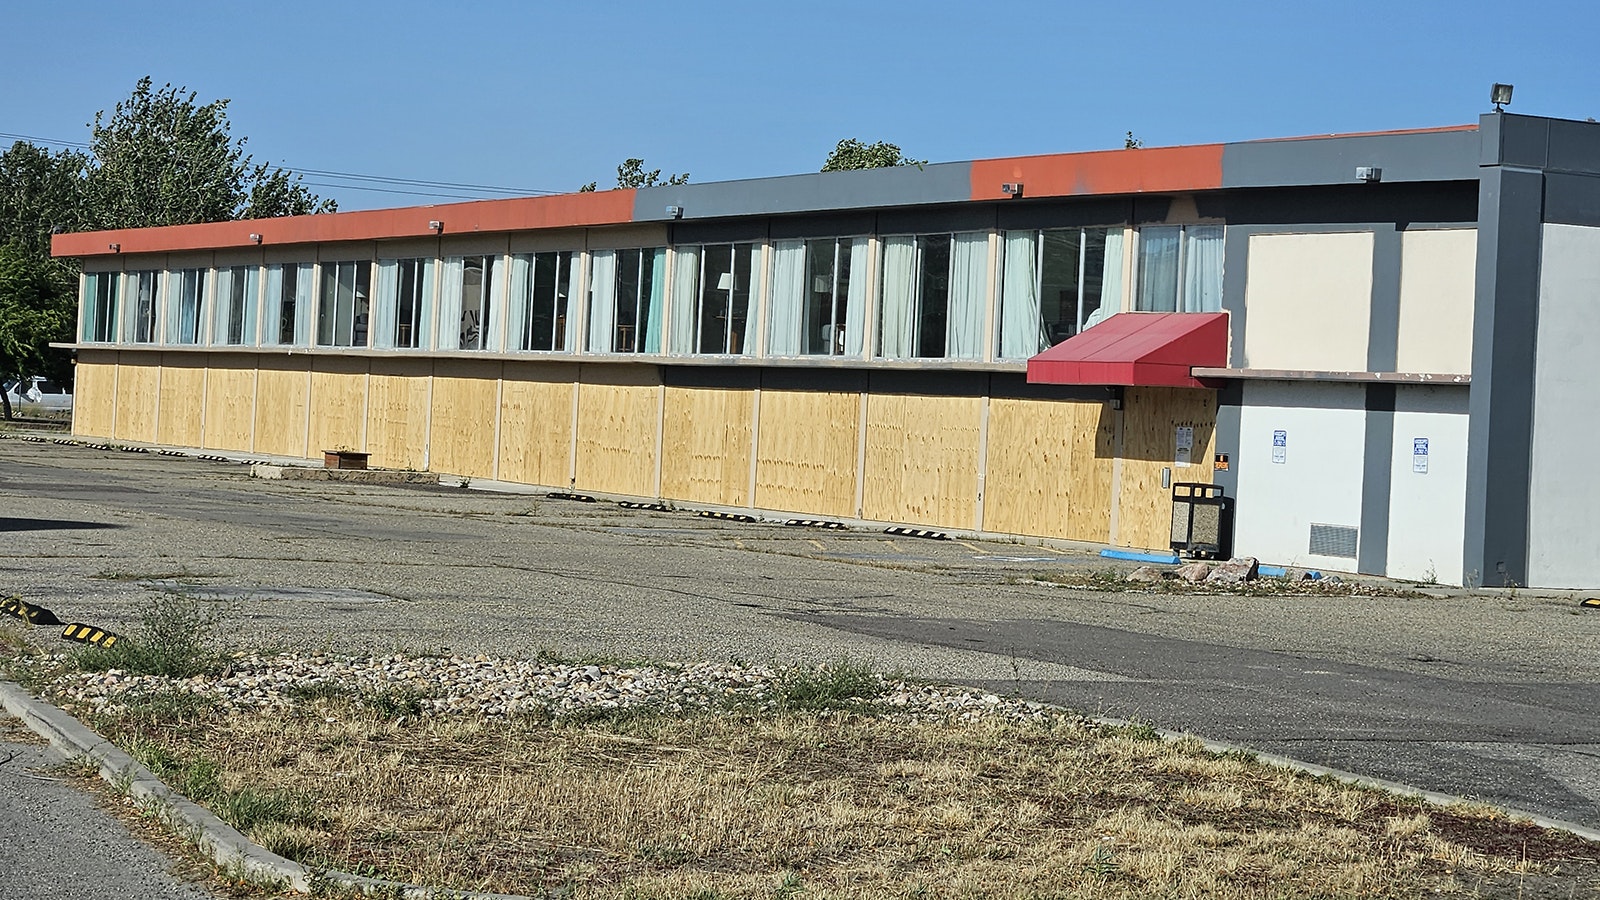 The vacant Econo Lodge at 300 W. F St. in Casper has become a haven for squatting homeless people.